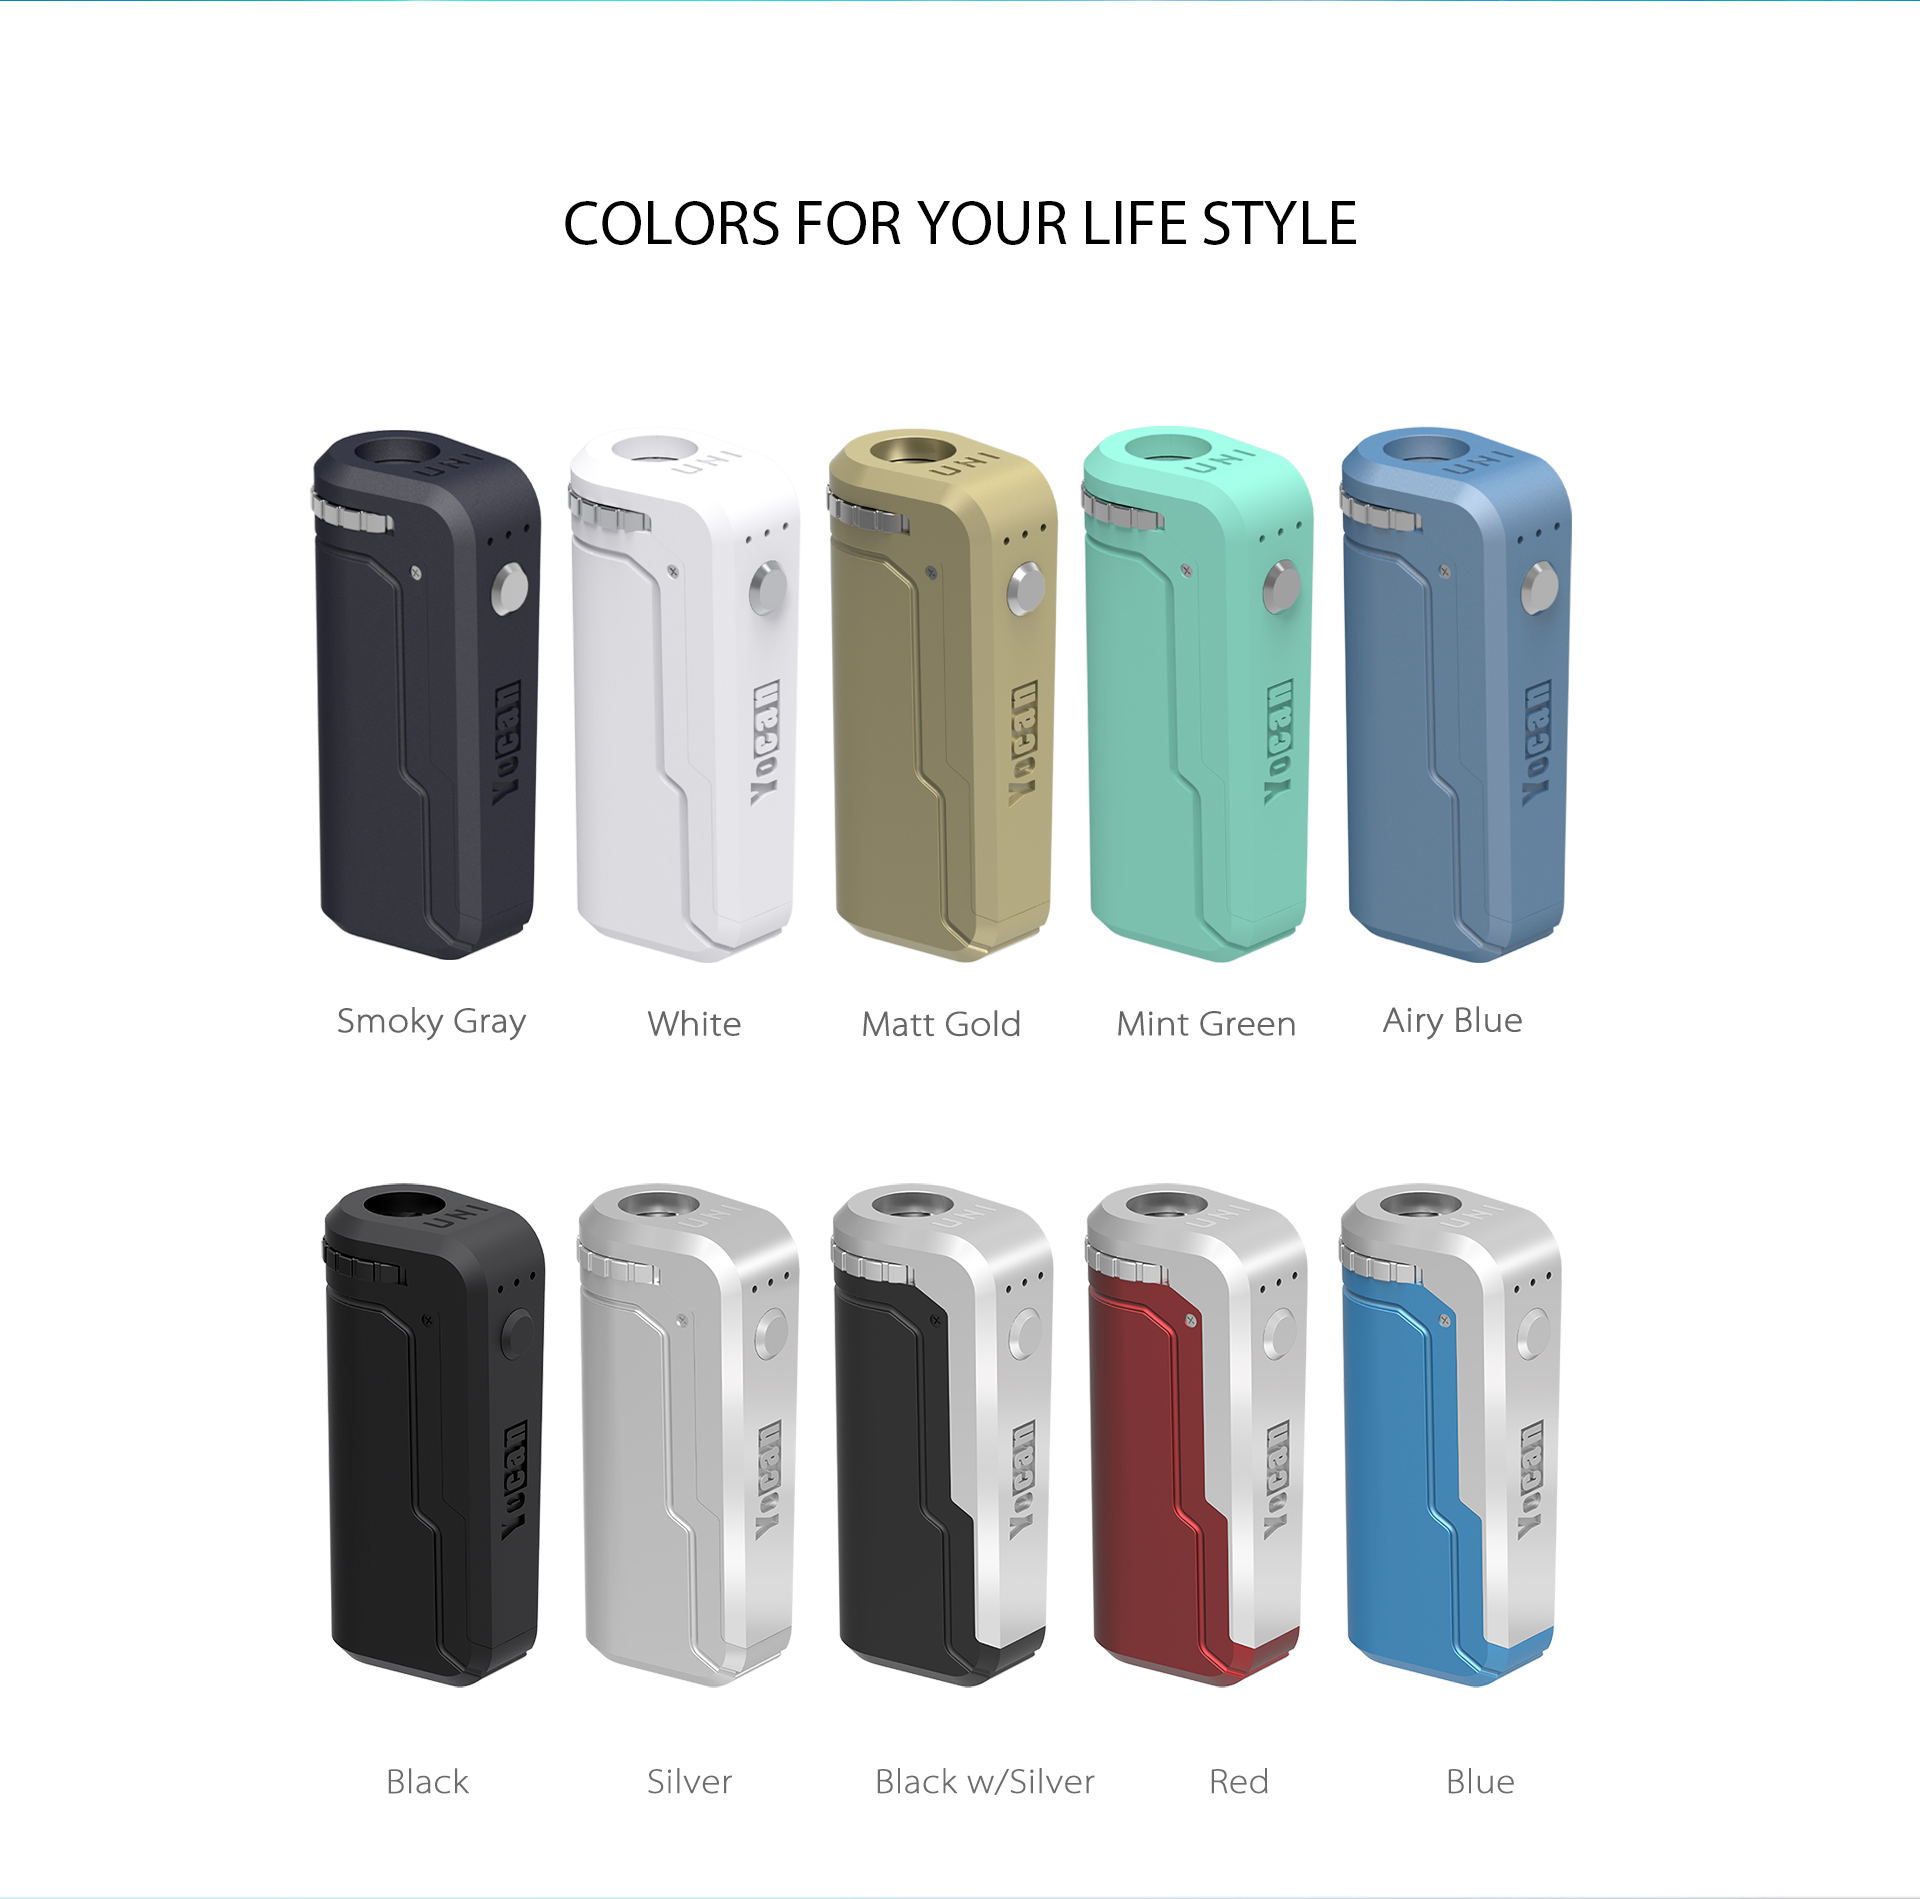 Yocan UNI Mod come with 10 colors